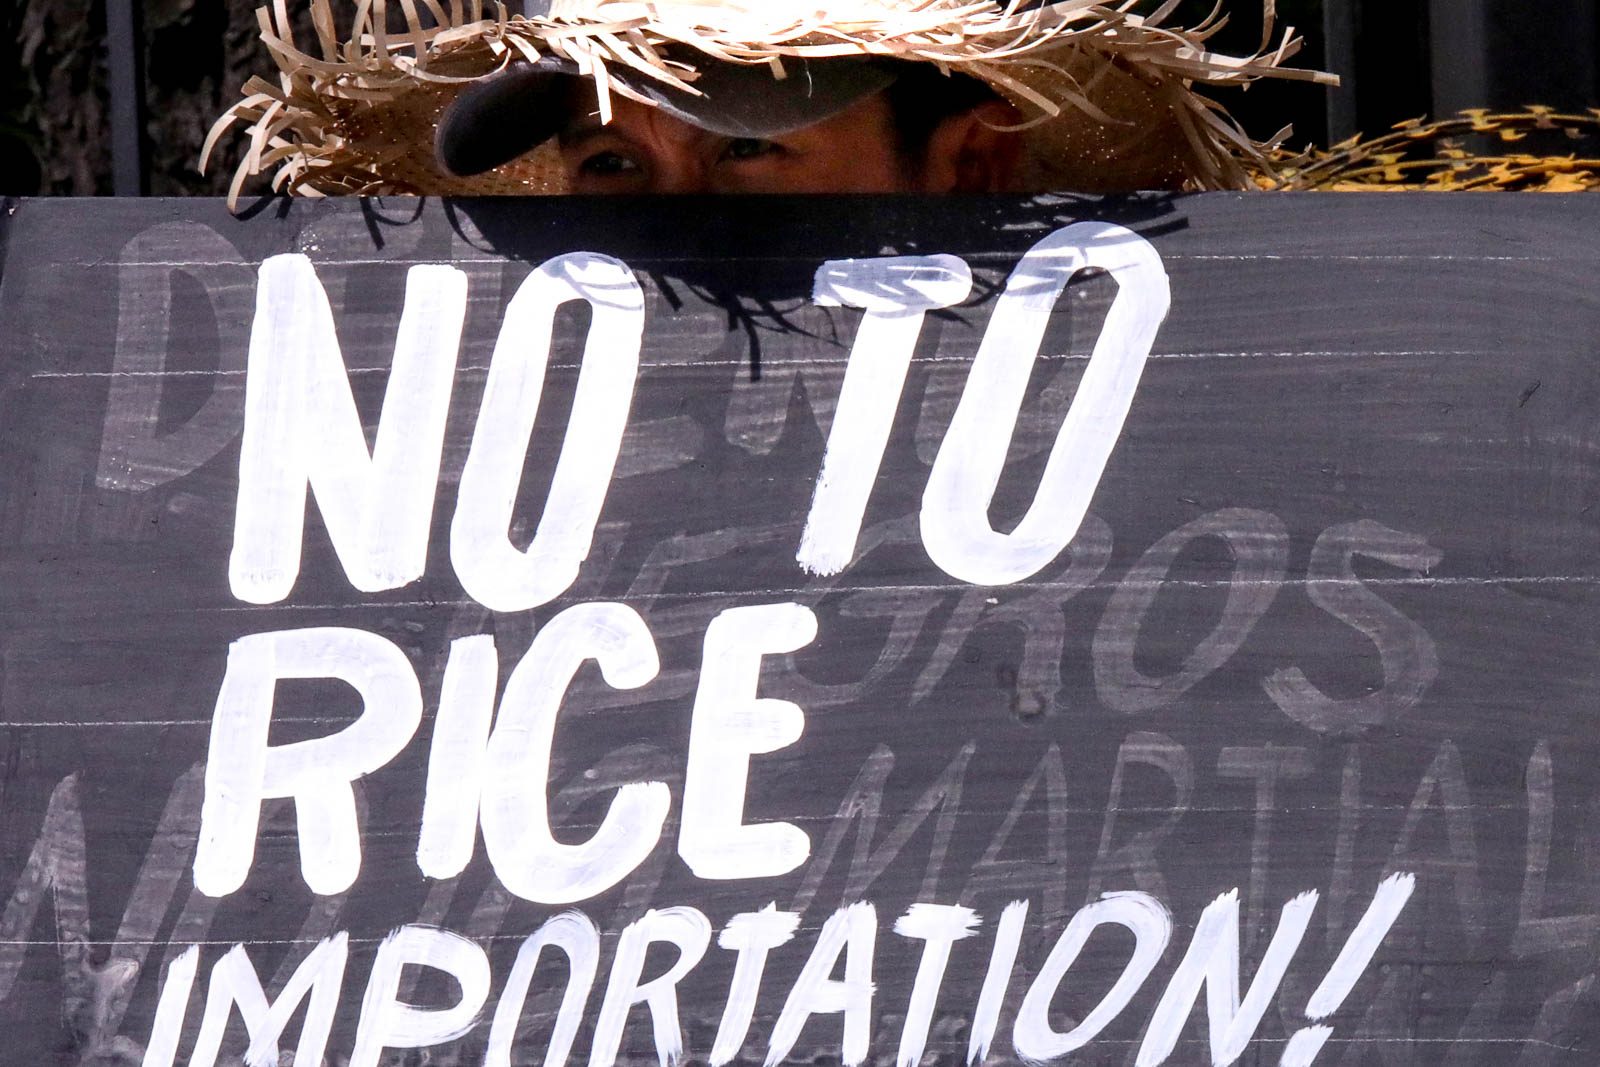 Rice prices still not hitting P27/kilo as projected under tariffication law